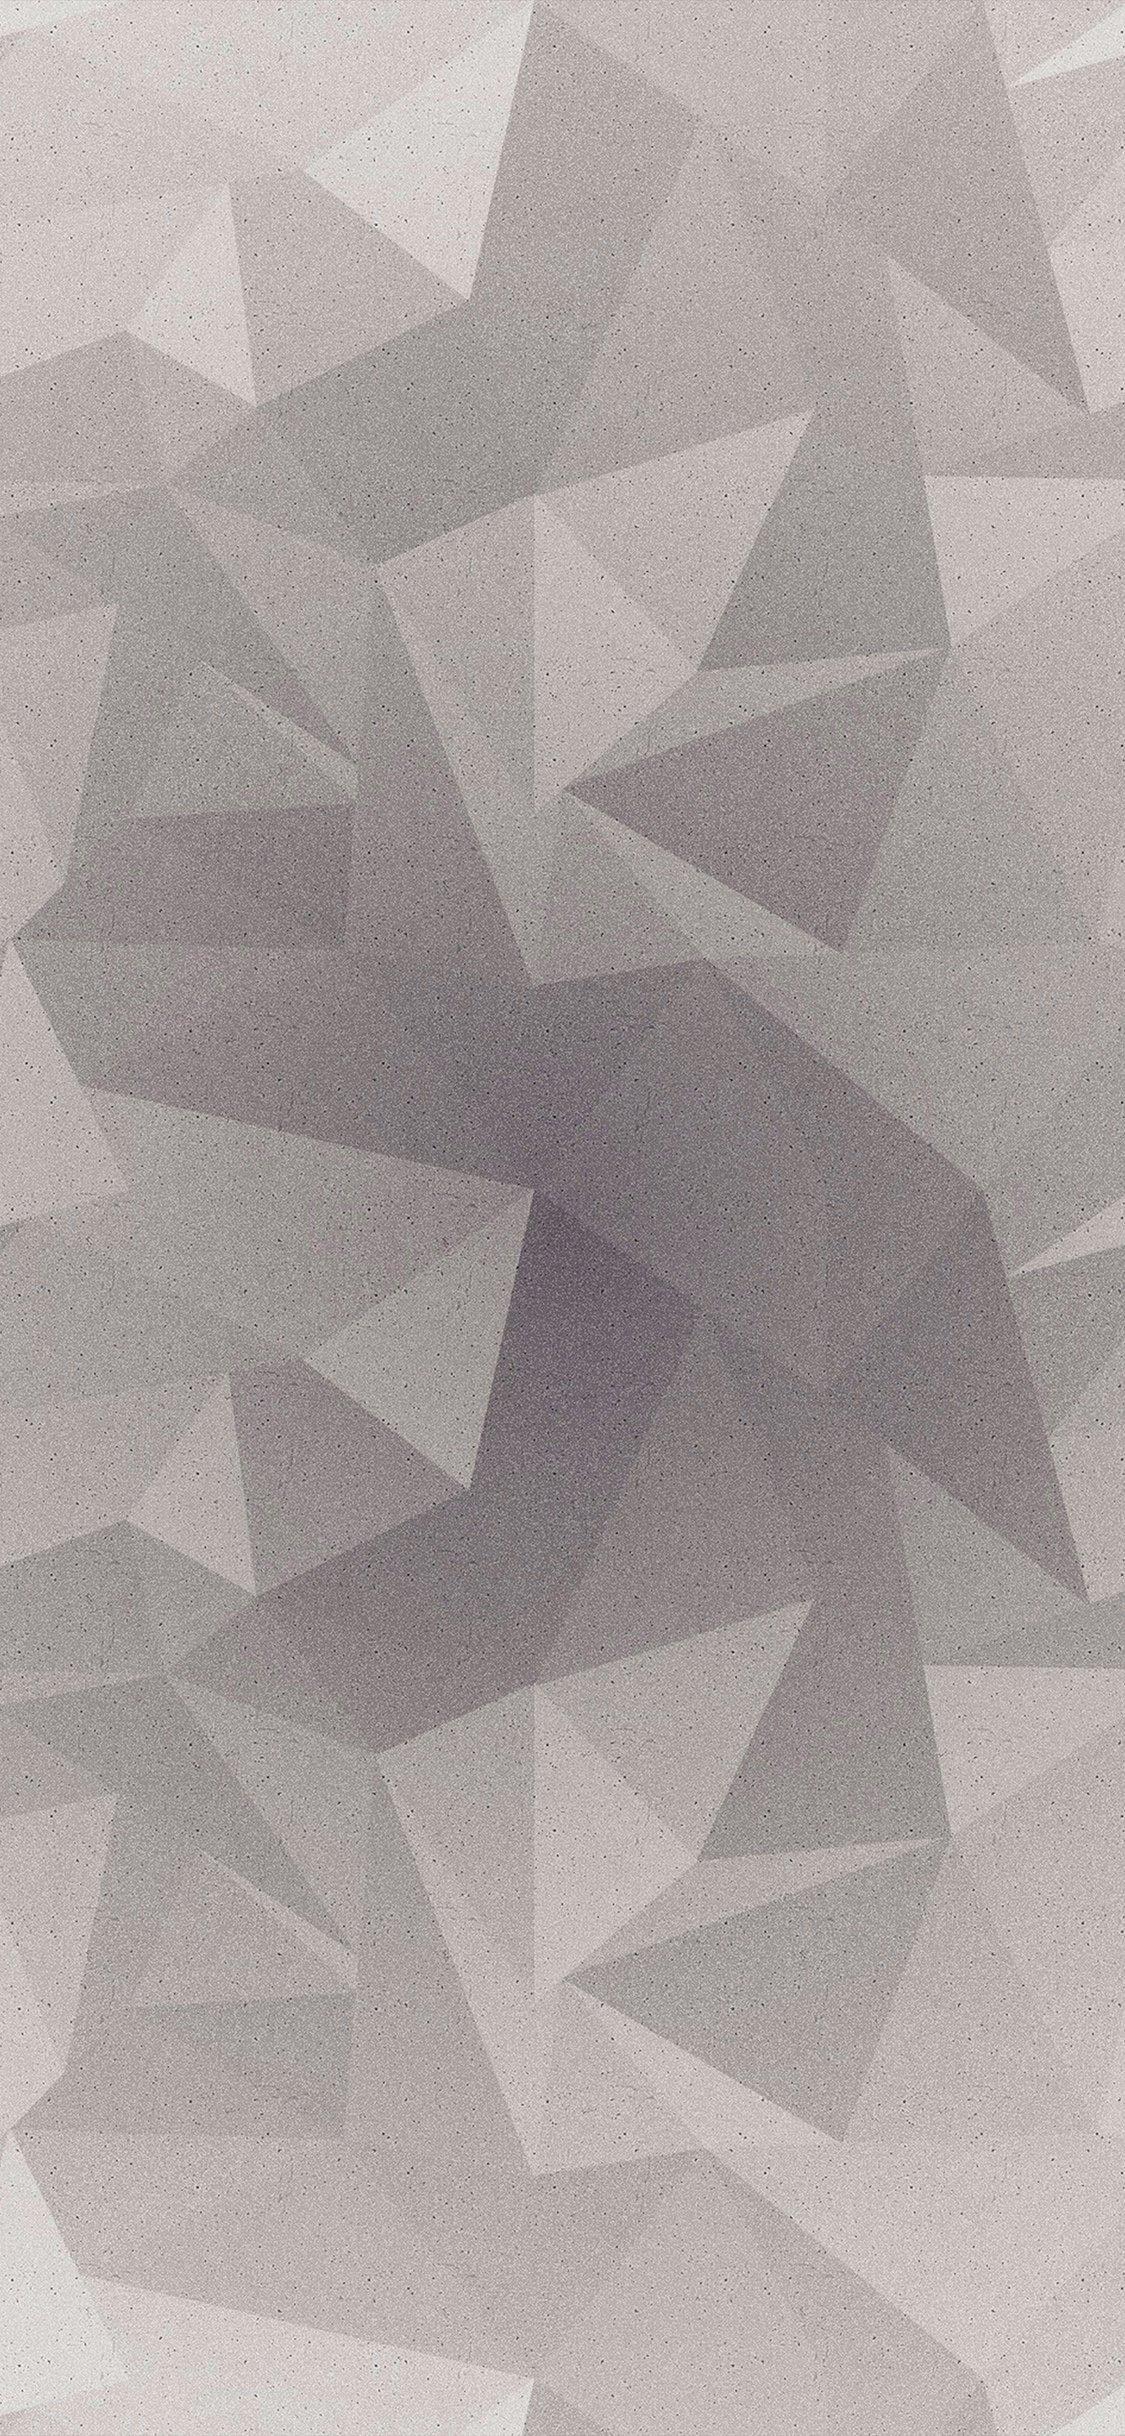 iPhone X wallpaper. abstract polygon white